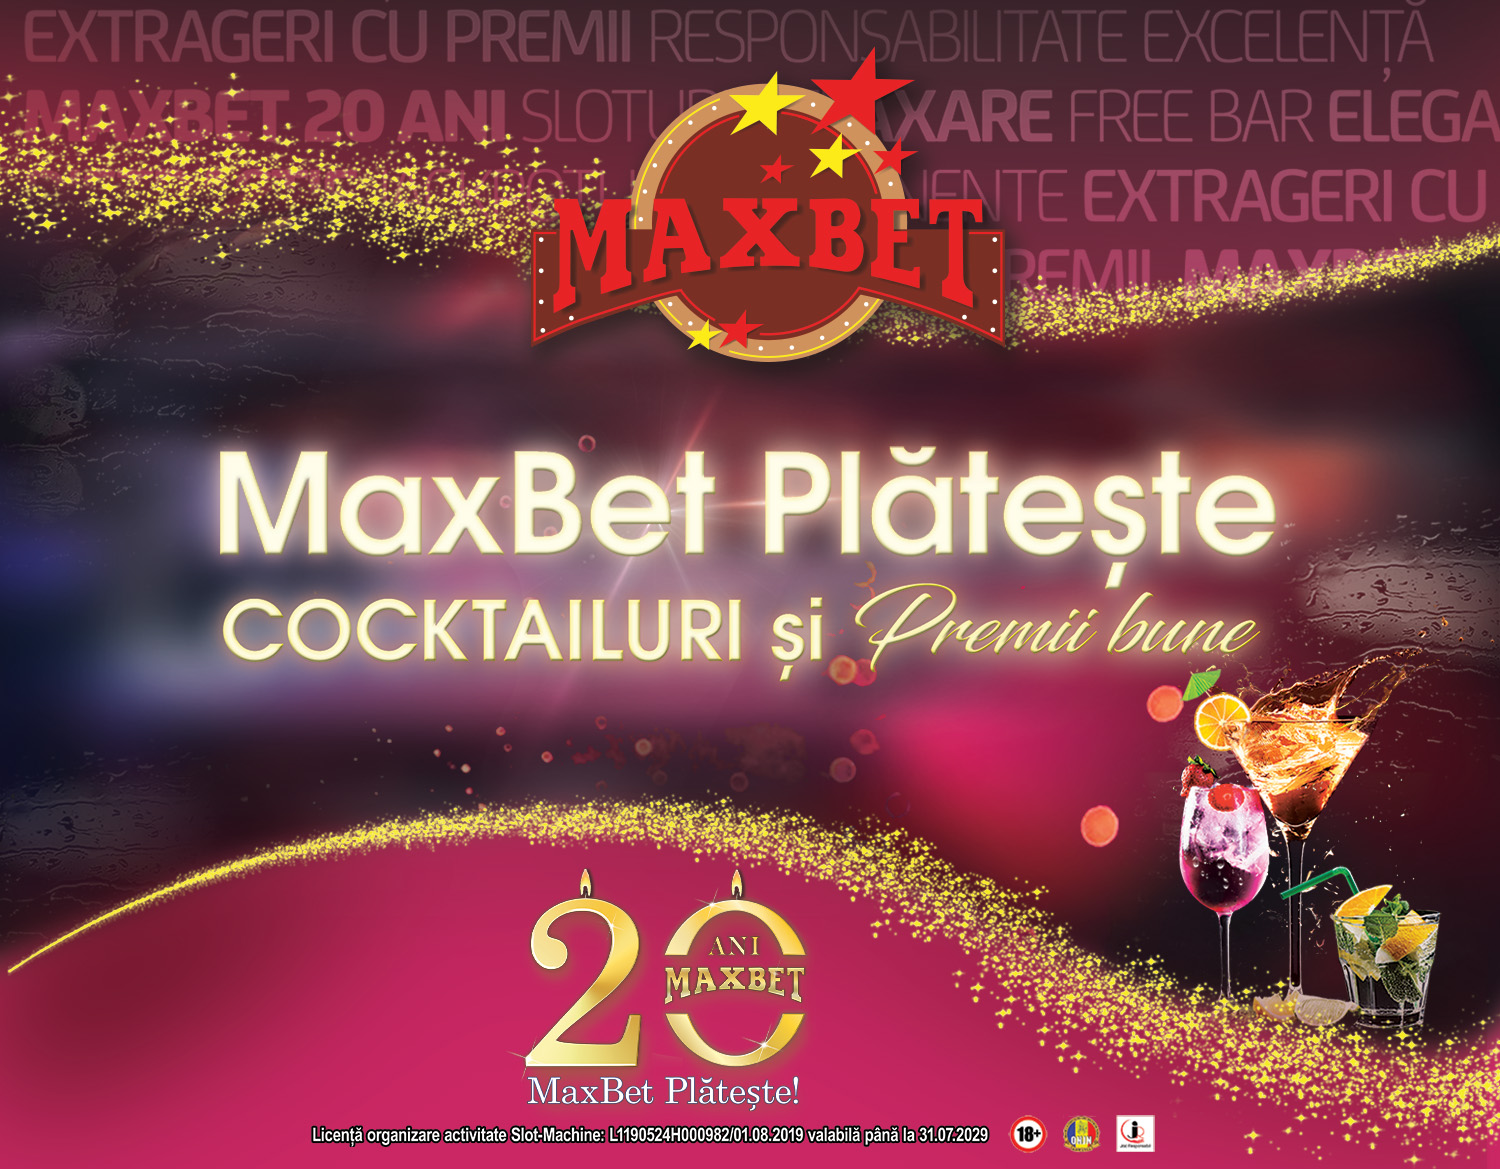 MaxBet pays out great cocktails and prizes!